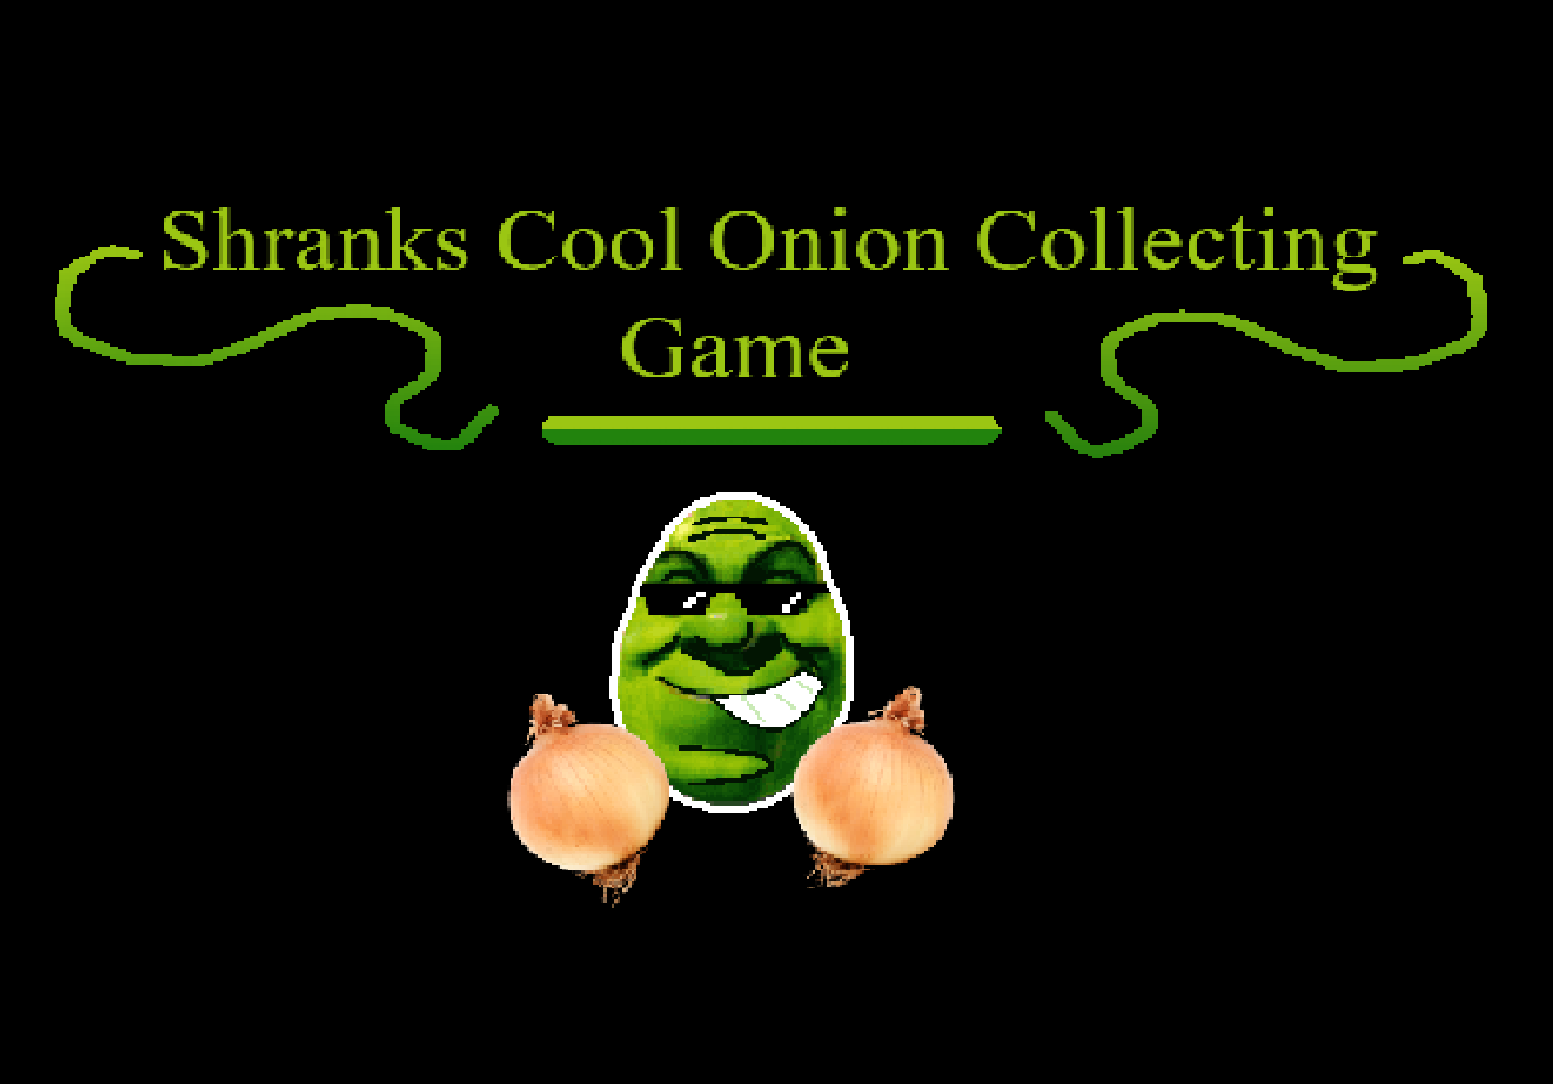 -Shranks Cool Onion Collecting Game-